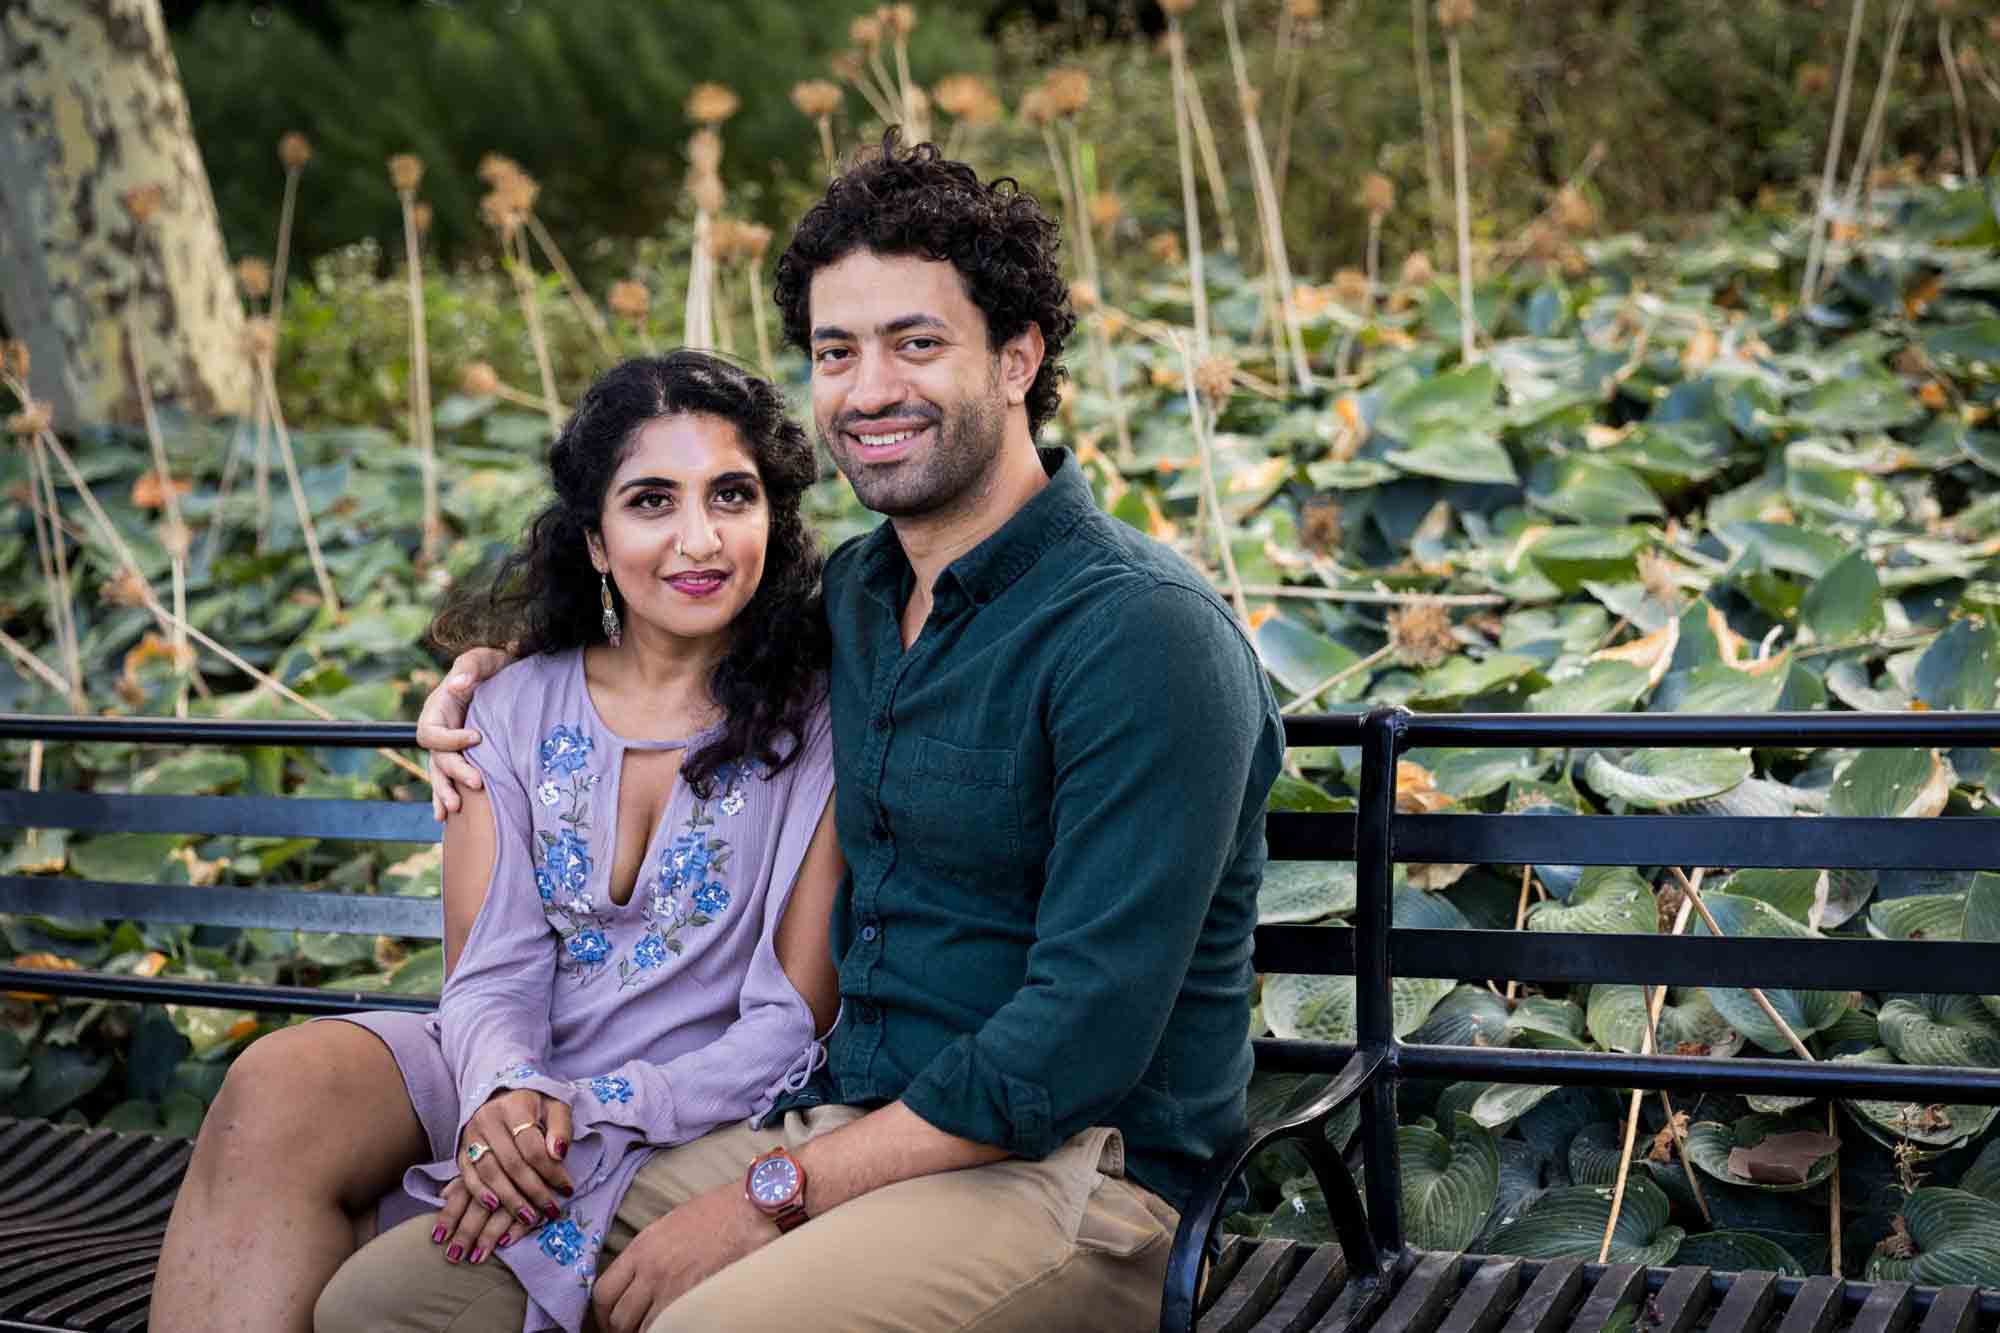 Battery Park engagement photos of couple sitting on bench in front of plants